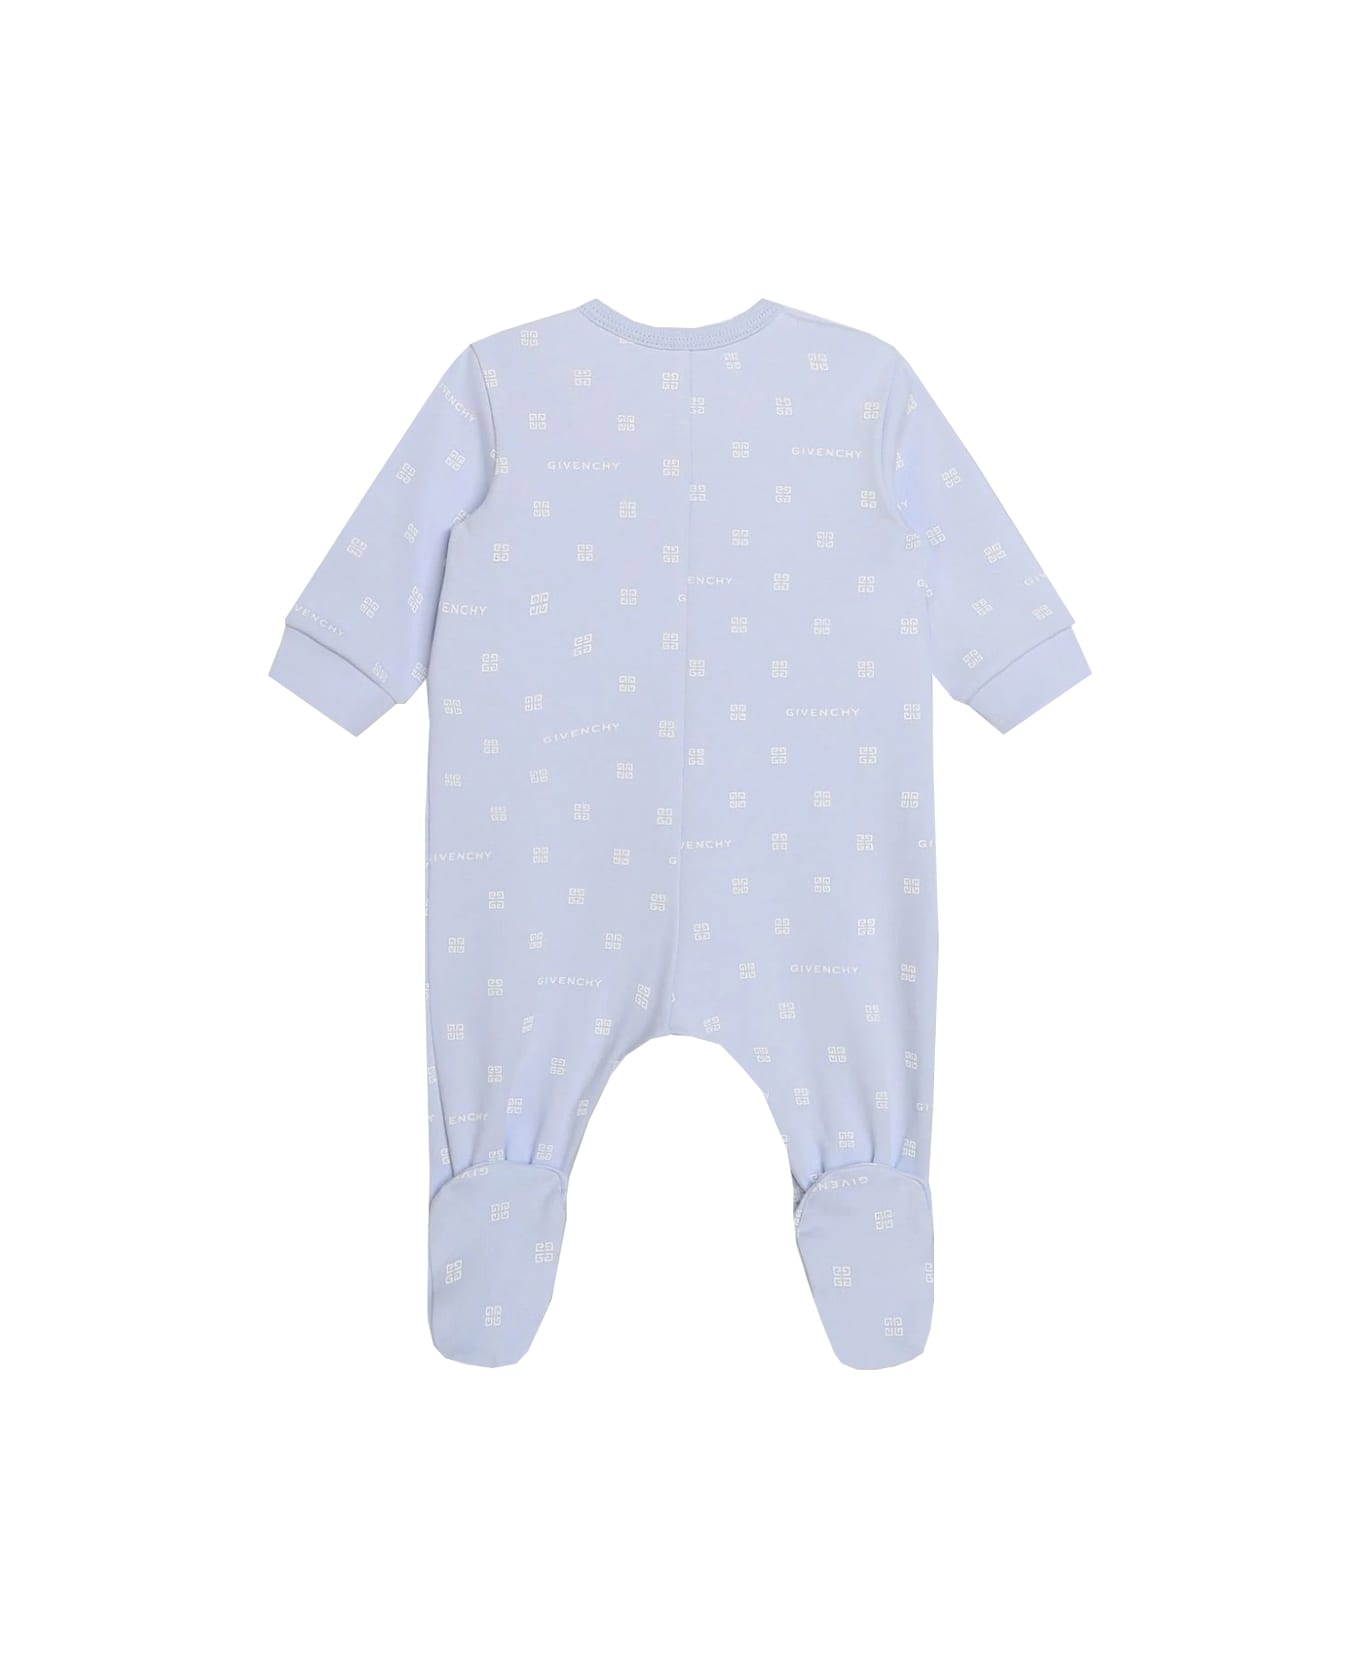 givenchy denim Romper With Print - Light blue